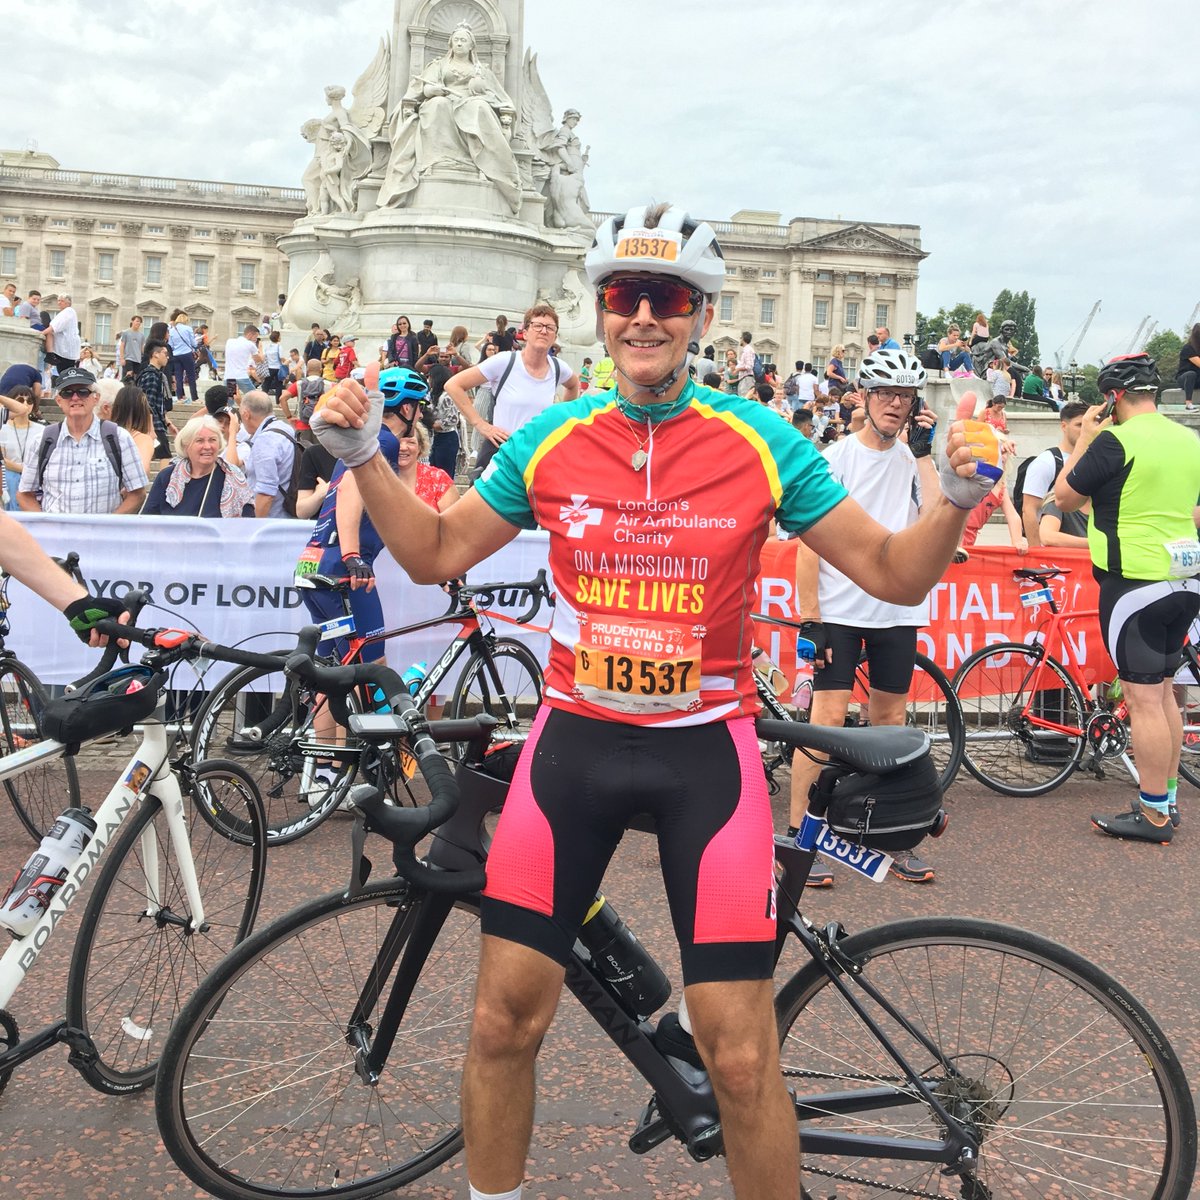 Good luck to our team who are taking on @RideLondon this weekend 🚲 Thank you for all of your support and incredible fundraising efforts 👏